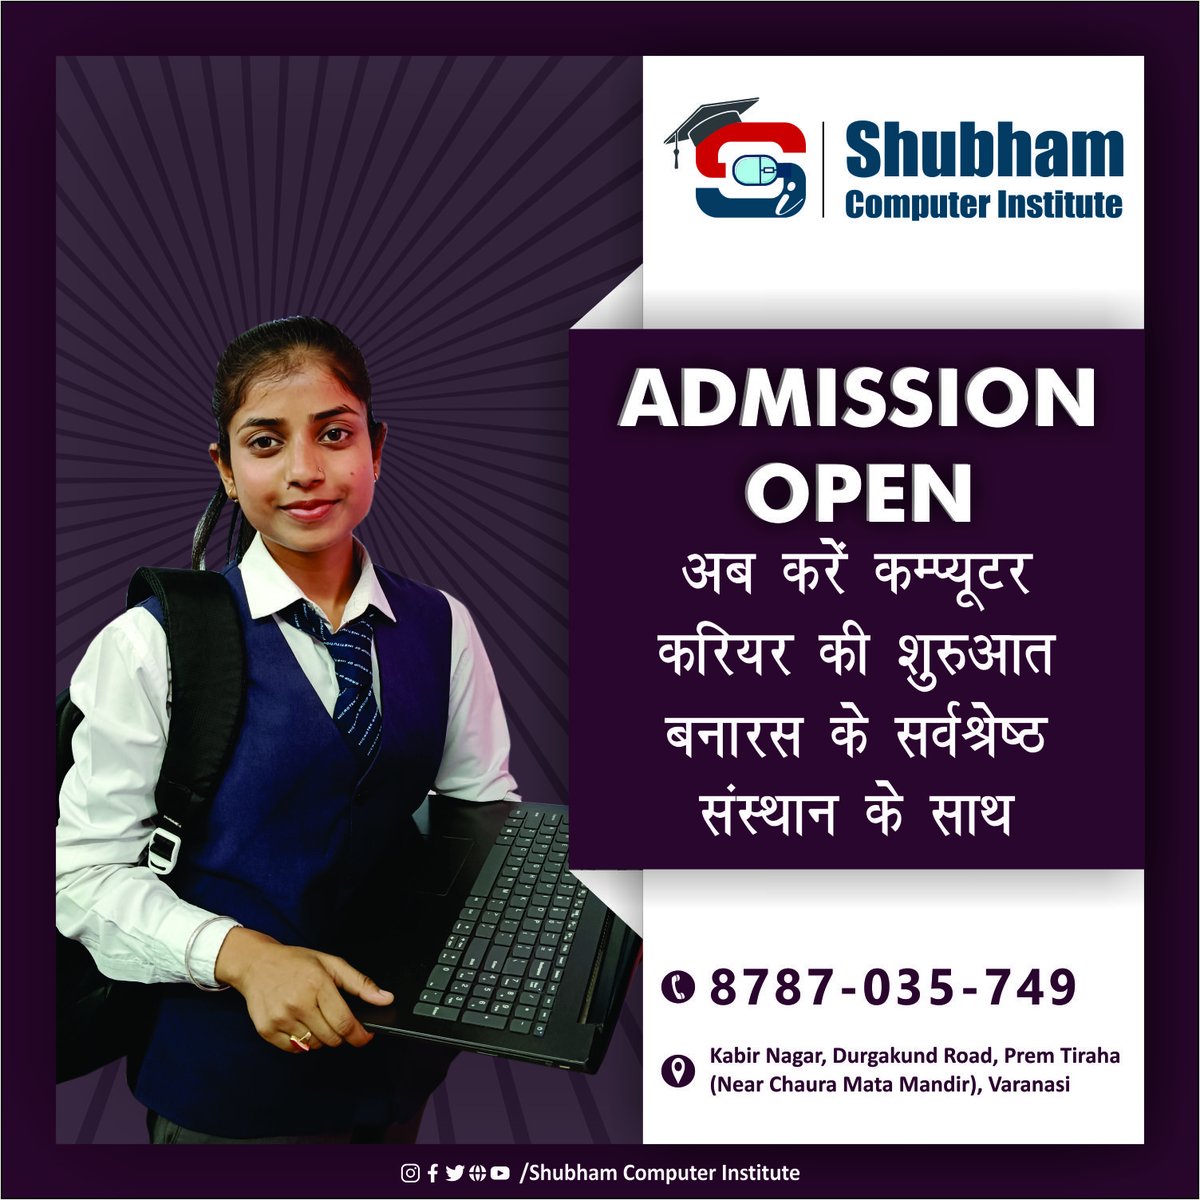 Admission Open
Join Sci & Learn Computer
.
.
.
.
.
#basiccomputer #shubhamcomputerinstitute #graphicdesign 
#sci #admission